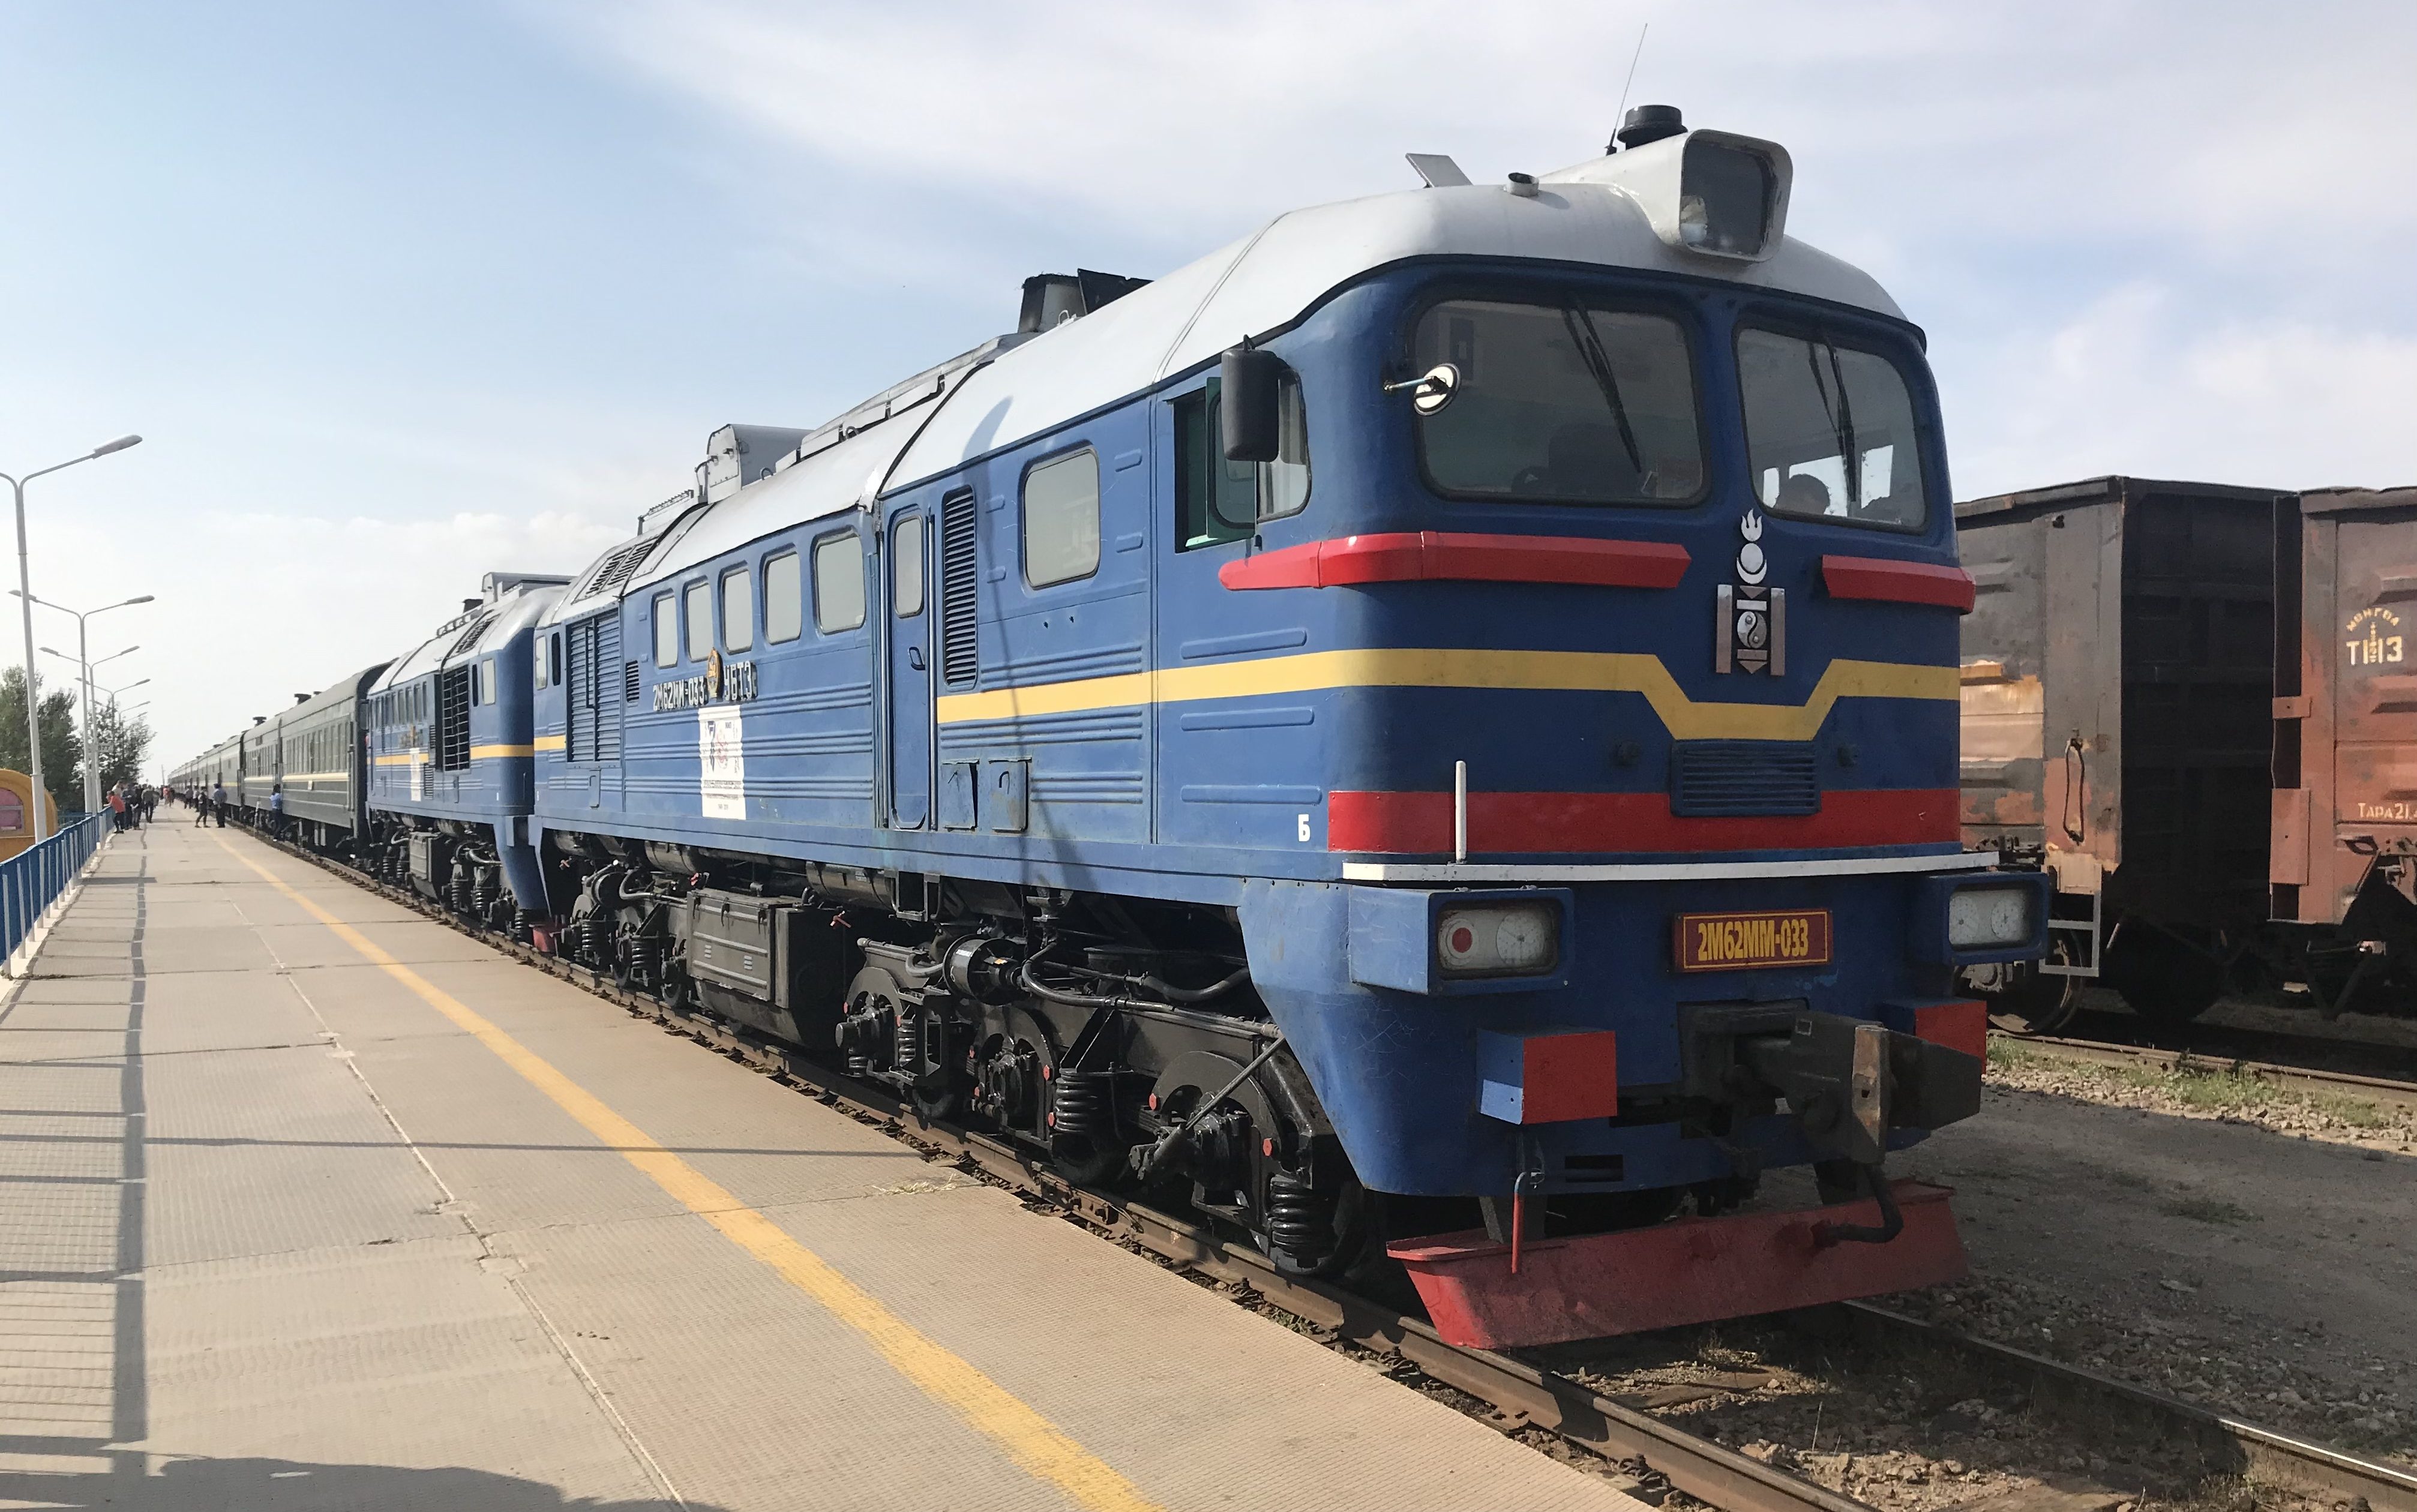 Double engined blue Trans Siberian Express train at rest at Ulaanbaatar station in Mongolia